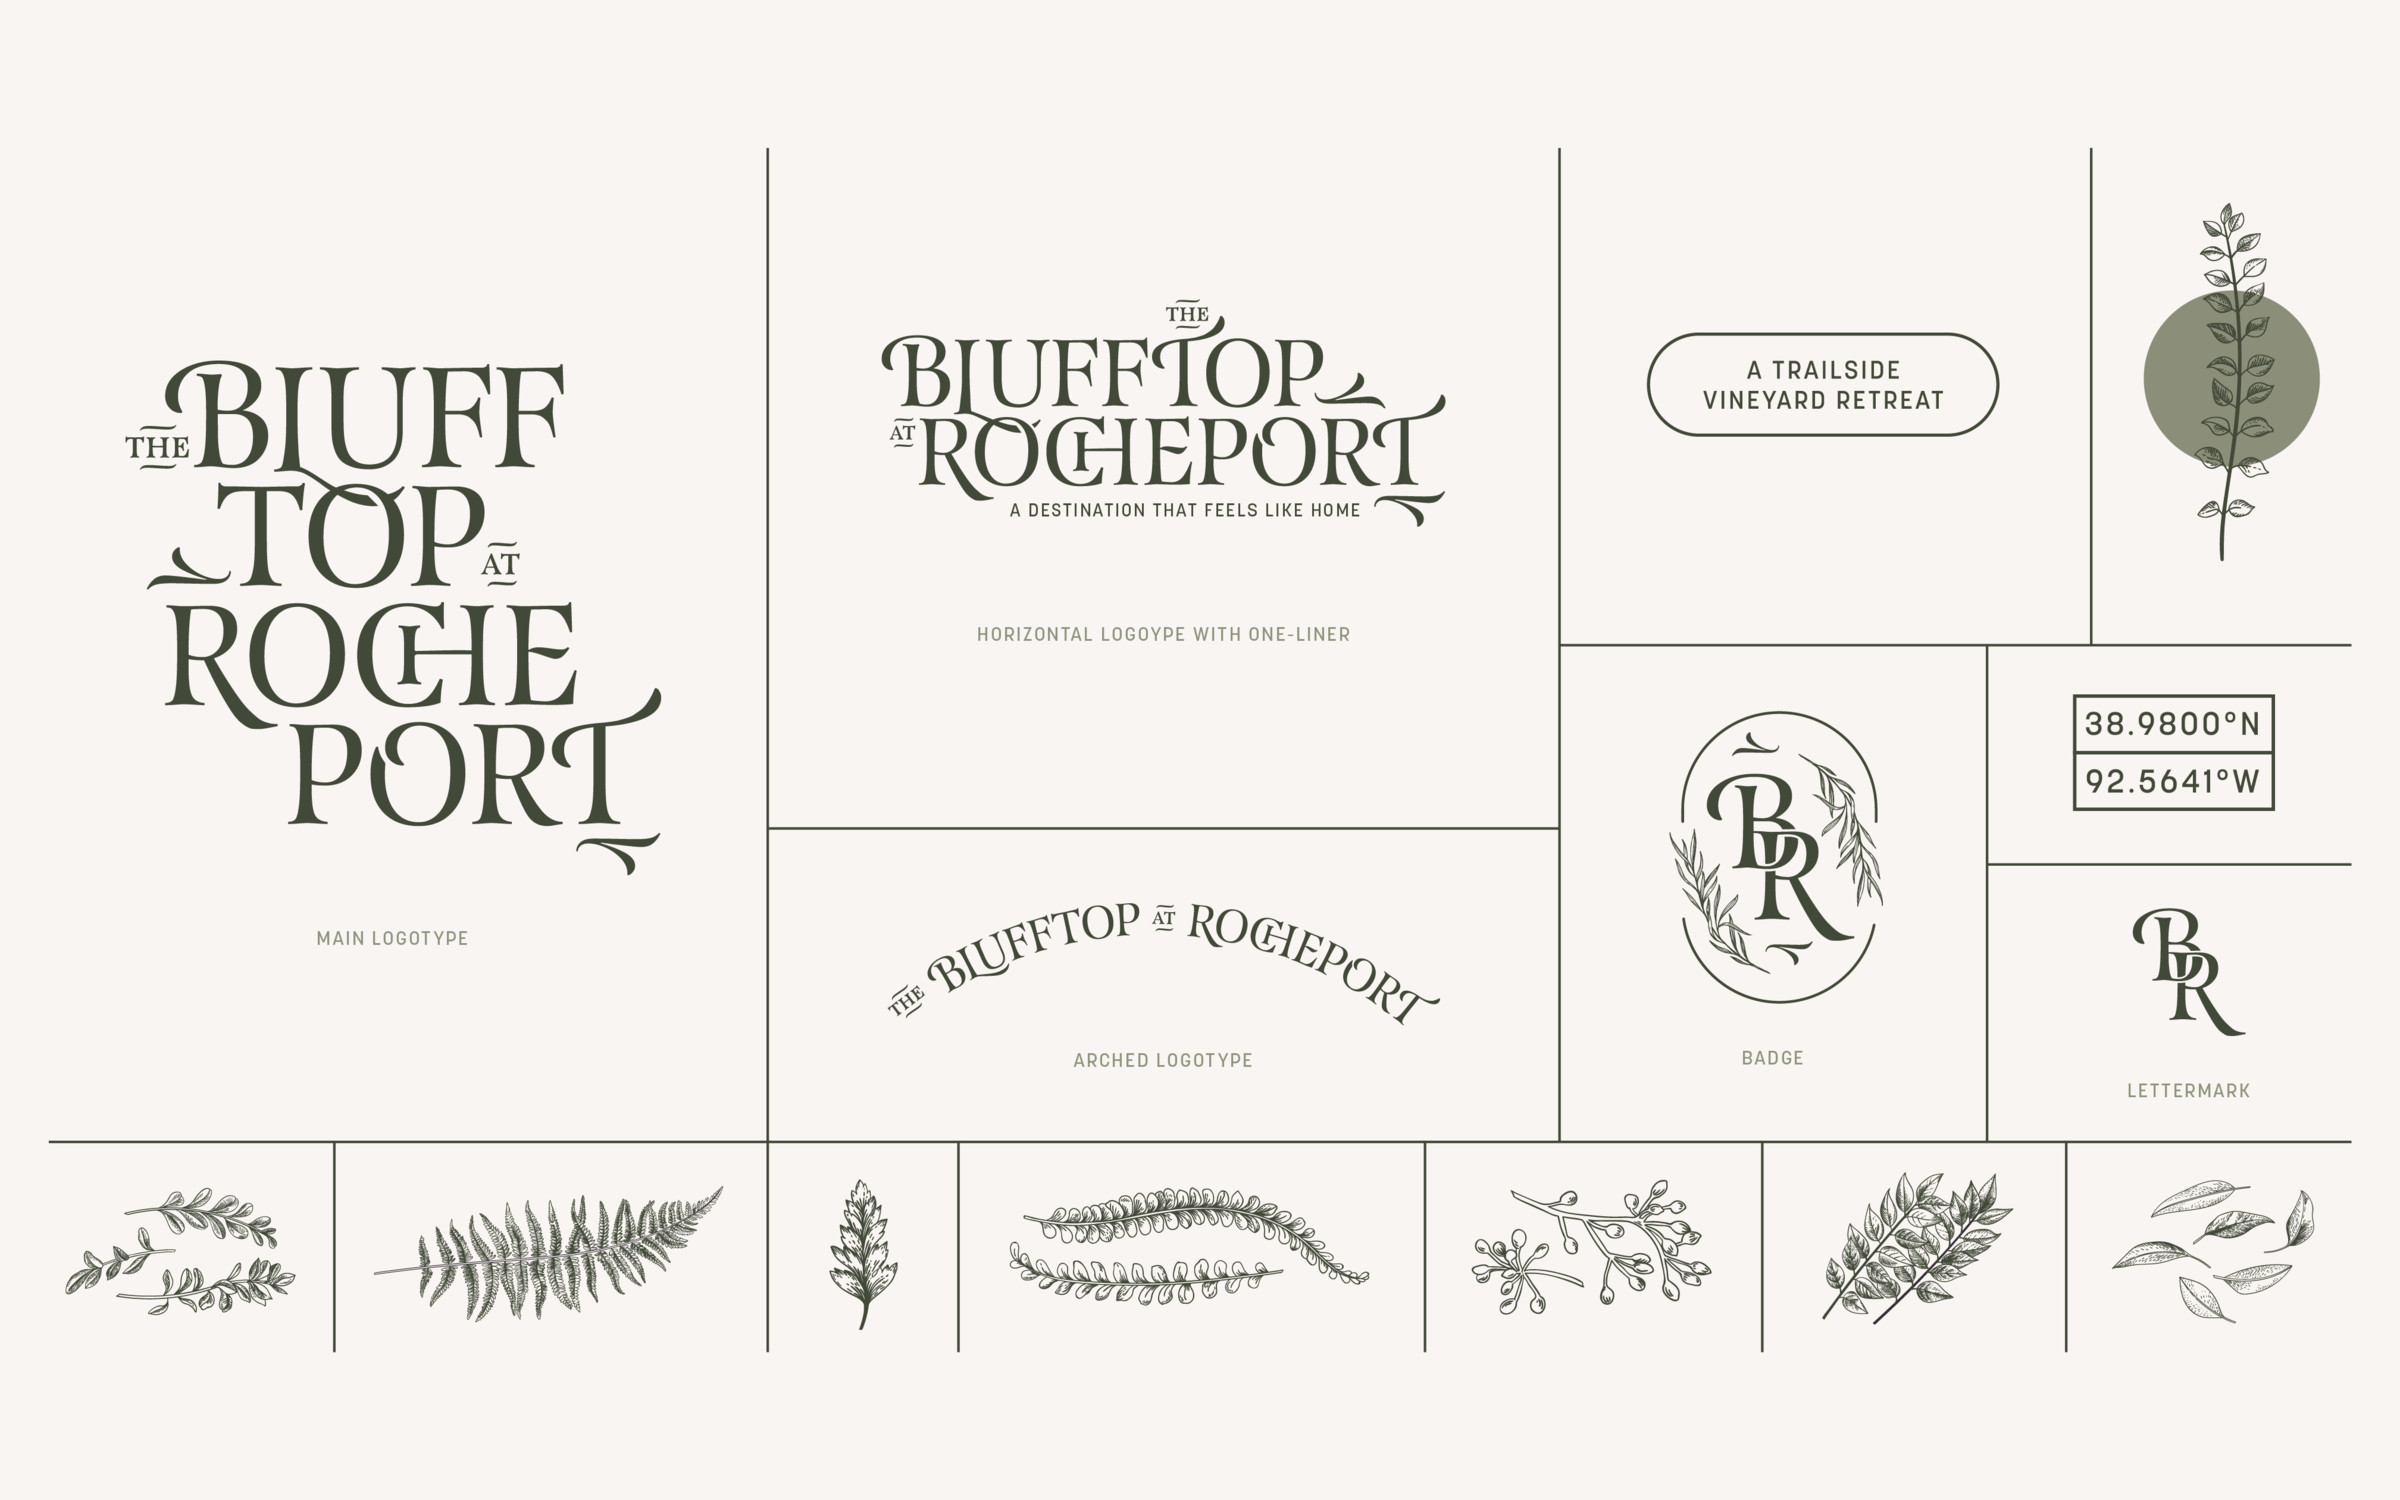 West typeface in use for the trailside vineyard retreat The Blufftop at Rocheport – among others